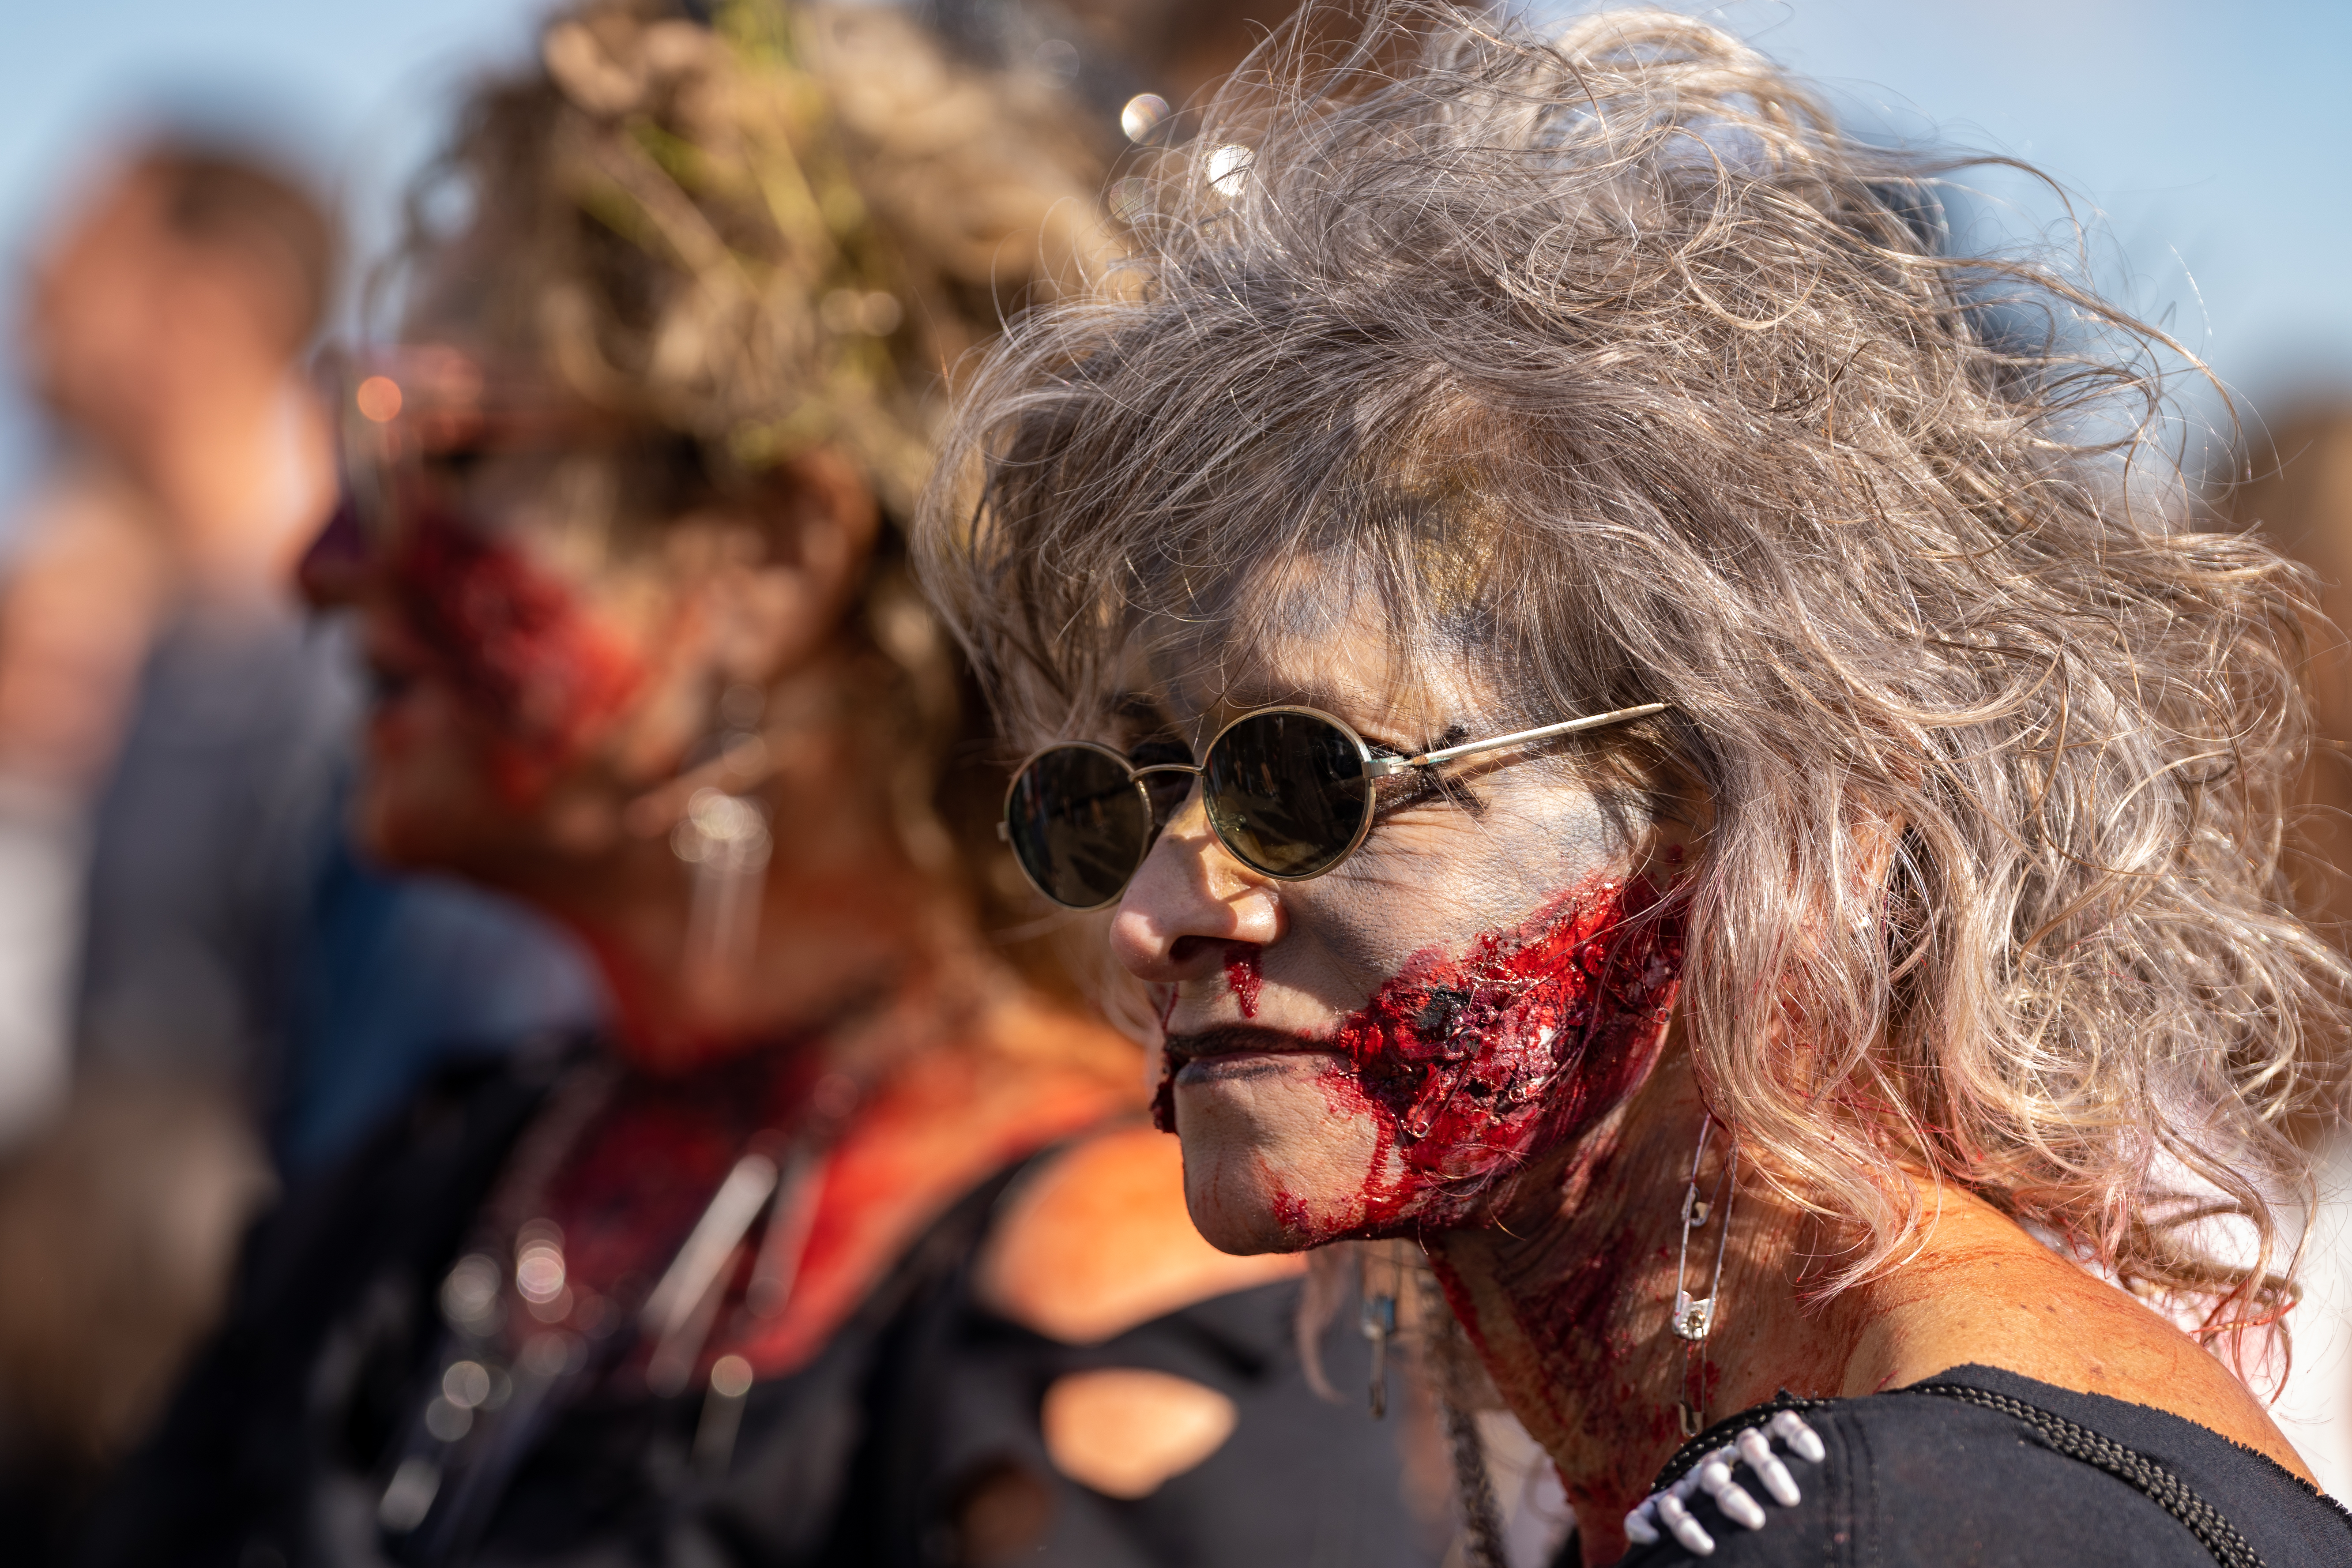 Maxine Bodson, from Seaside Heights, participates in the 14th Asbury Park Zombie Walk in Asbury Park on Saturday, October 8, 2022. The zombie walk held its first themed year with the theme being 80's and 90's punk and metal.